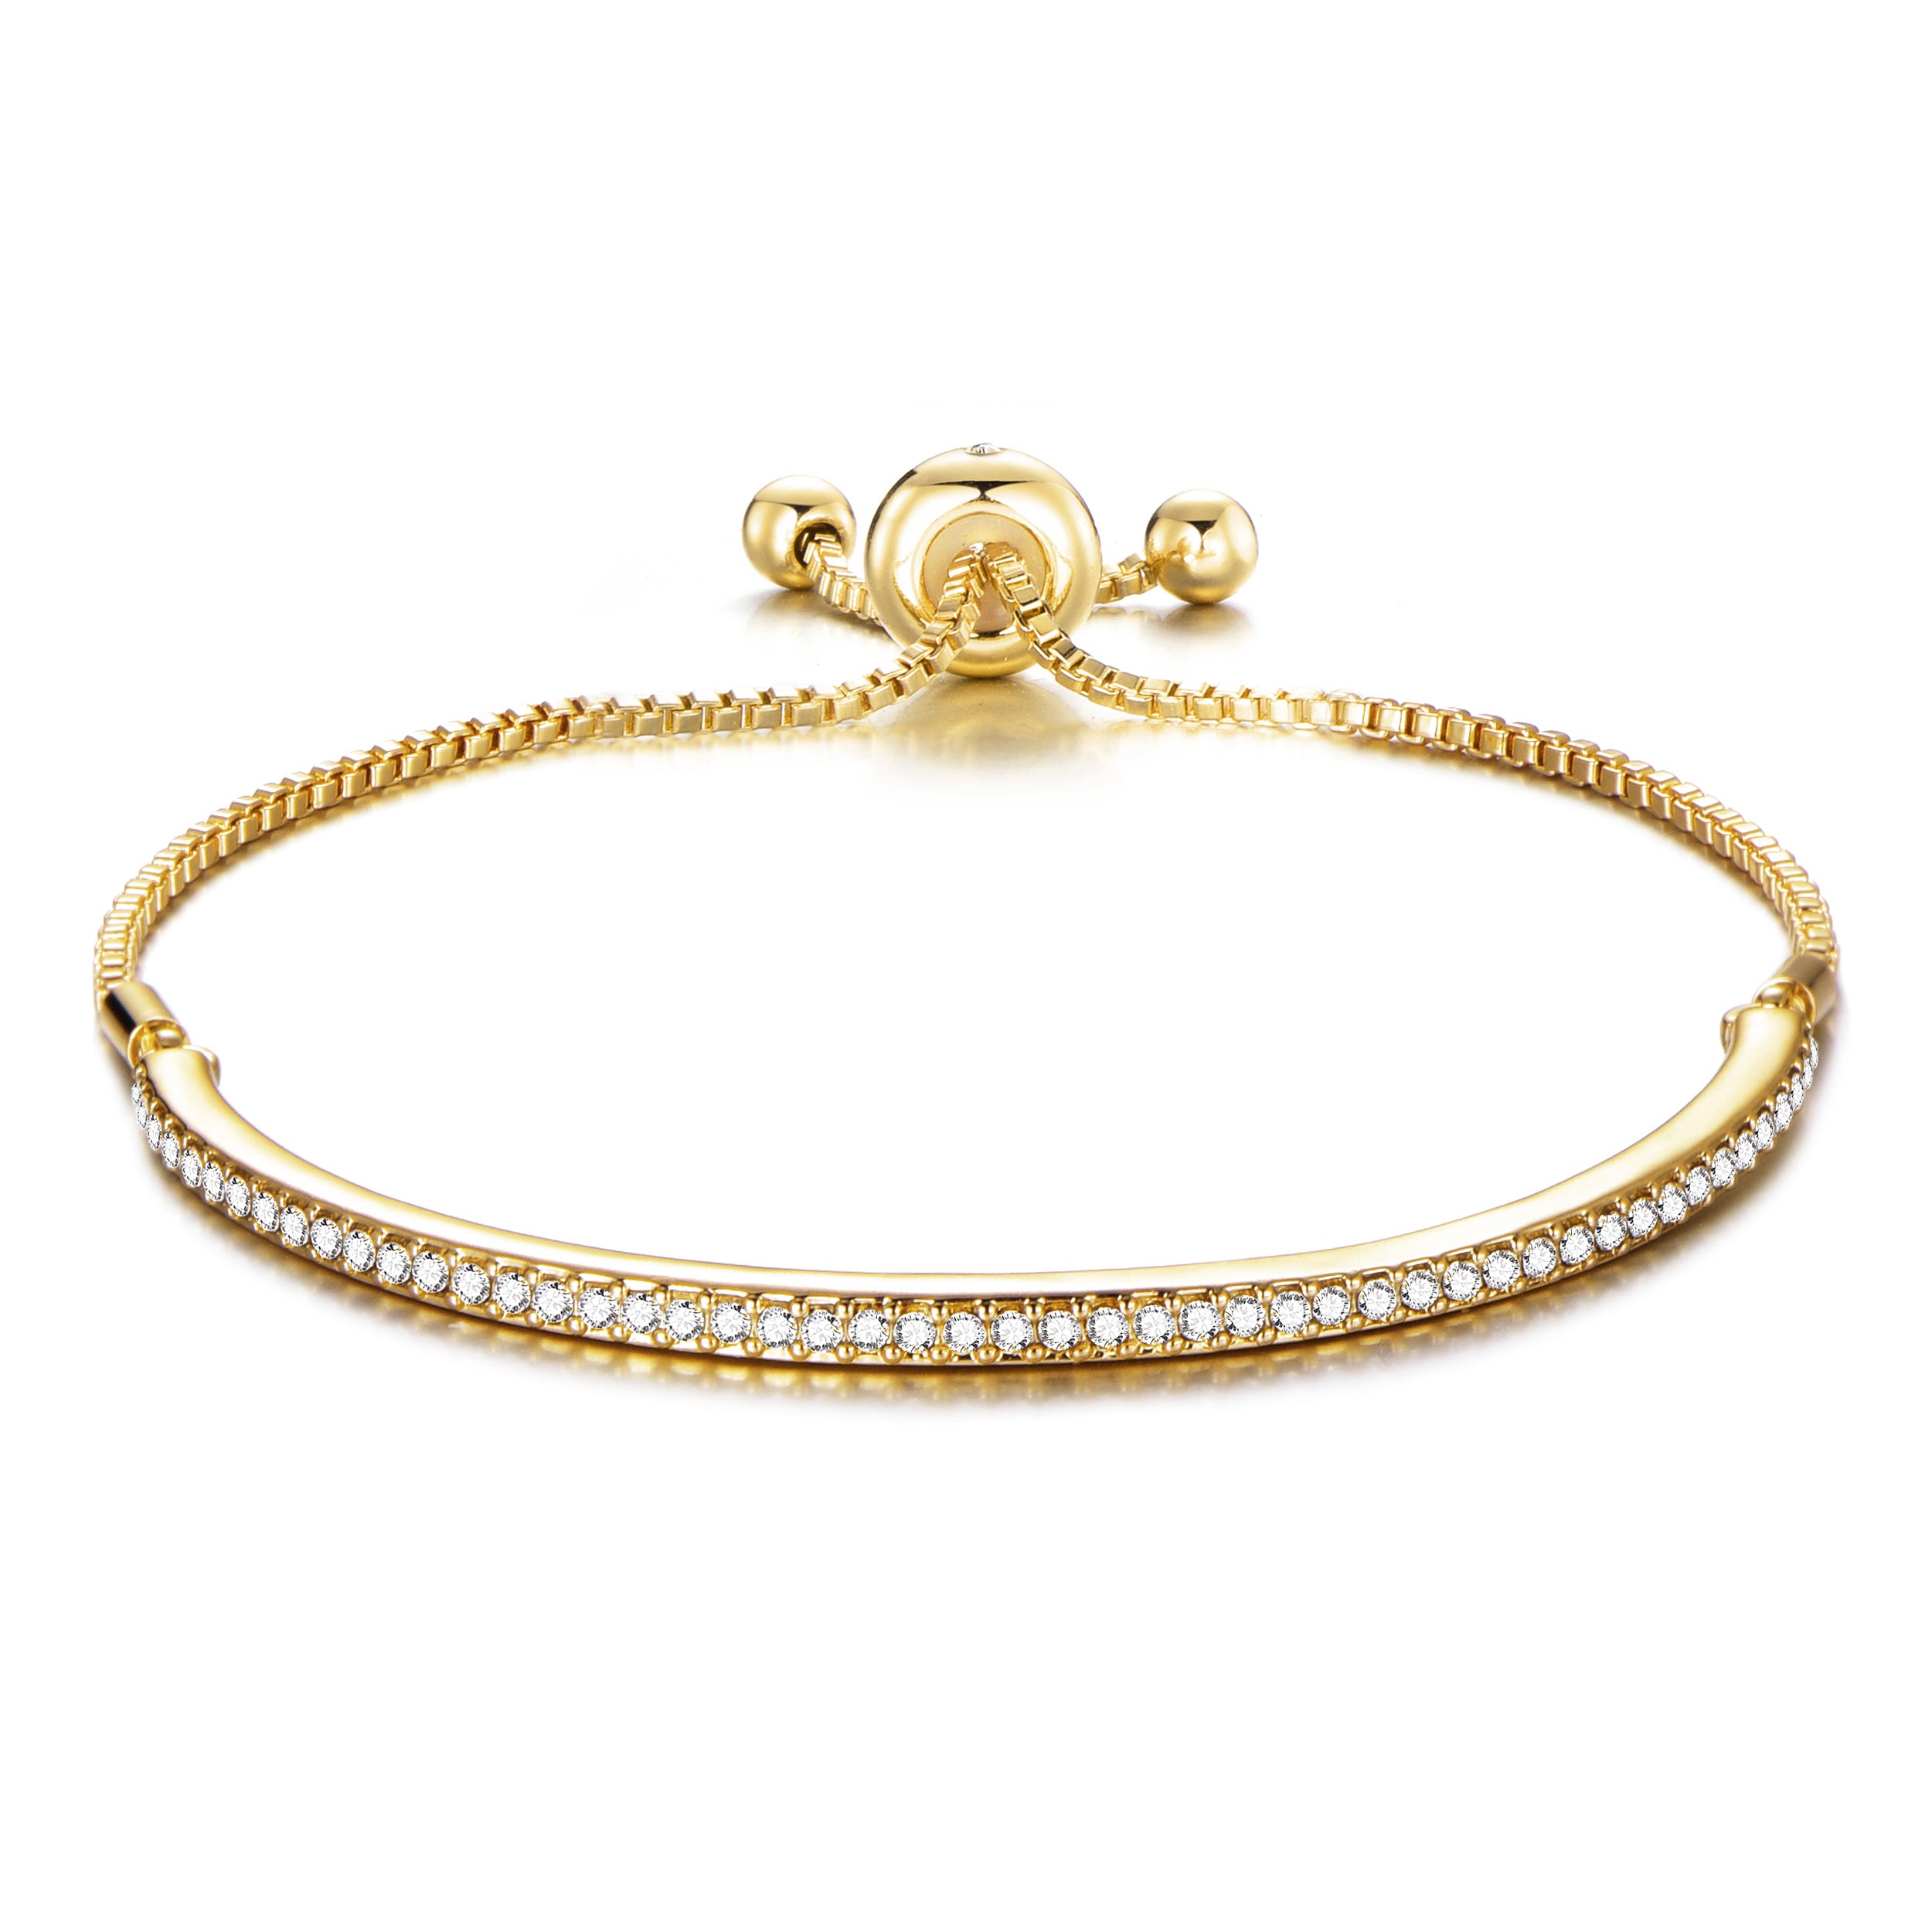 Gold Plated Friendship Bracelet Created with Zircondia® Crystals by Philip Jones Jewellery